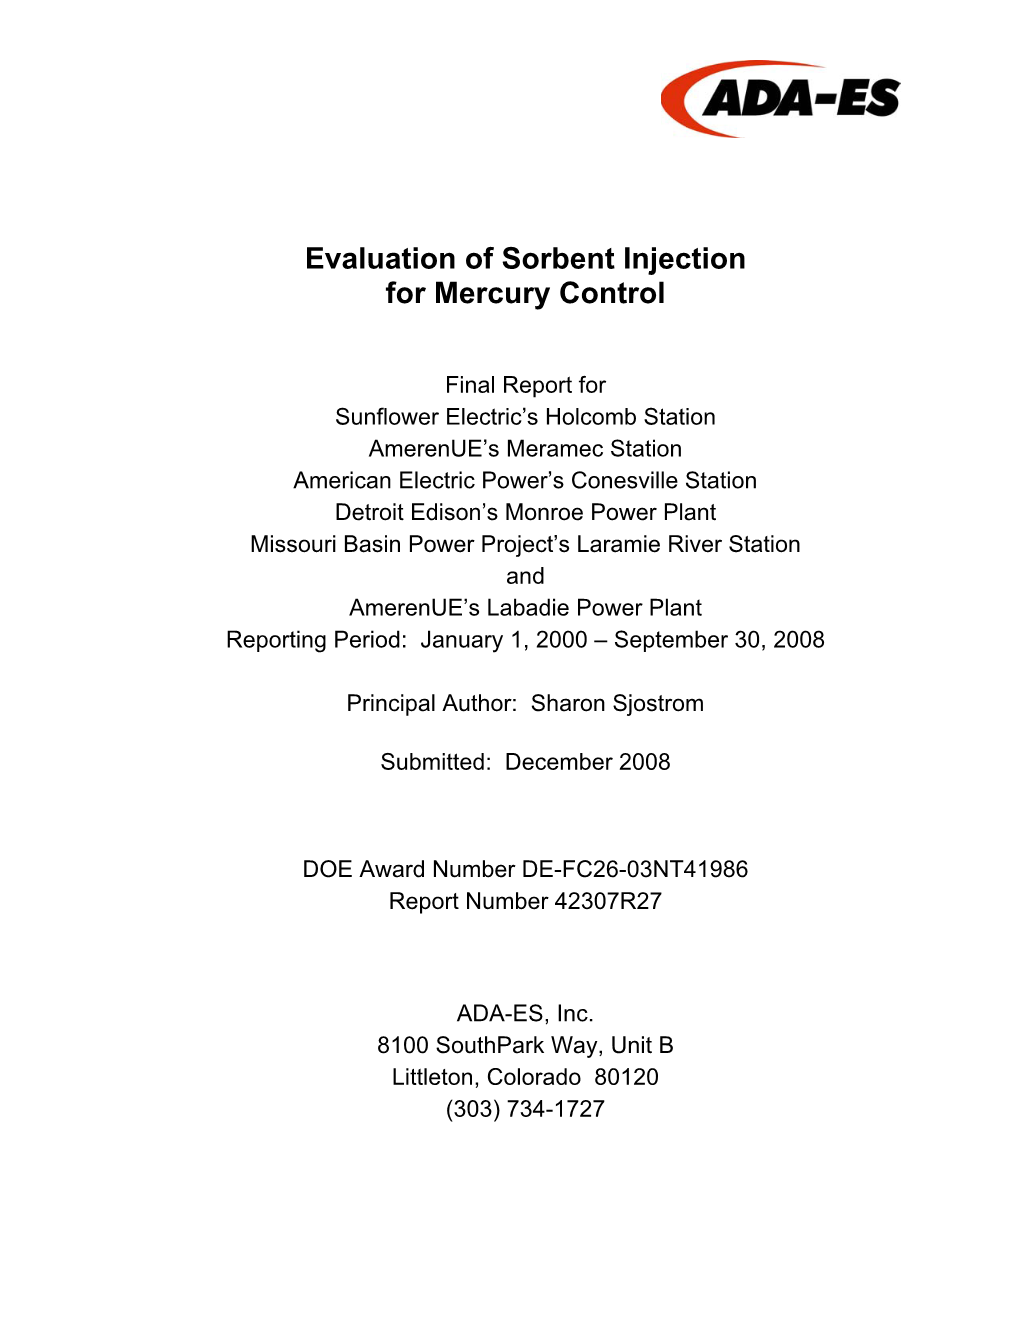 Evaluation of Sorbent Injection for Mercury Control